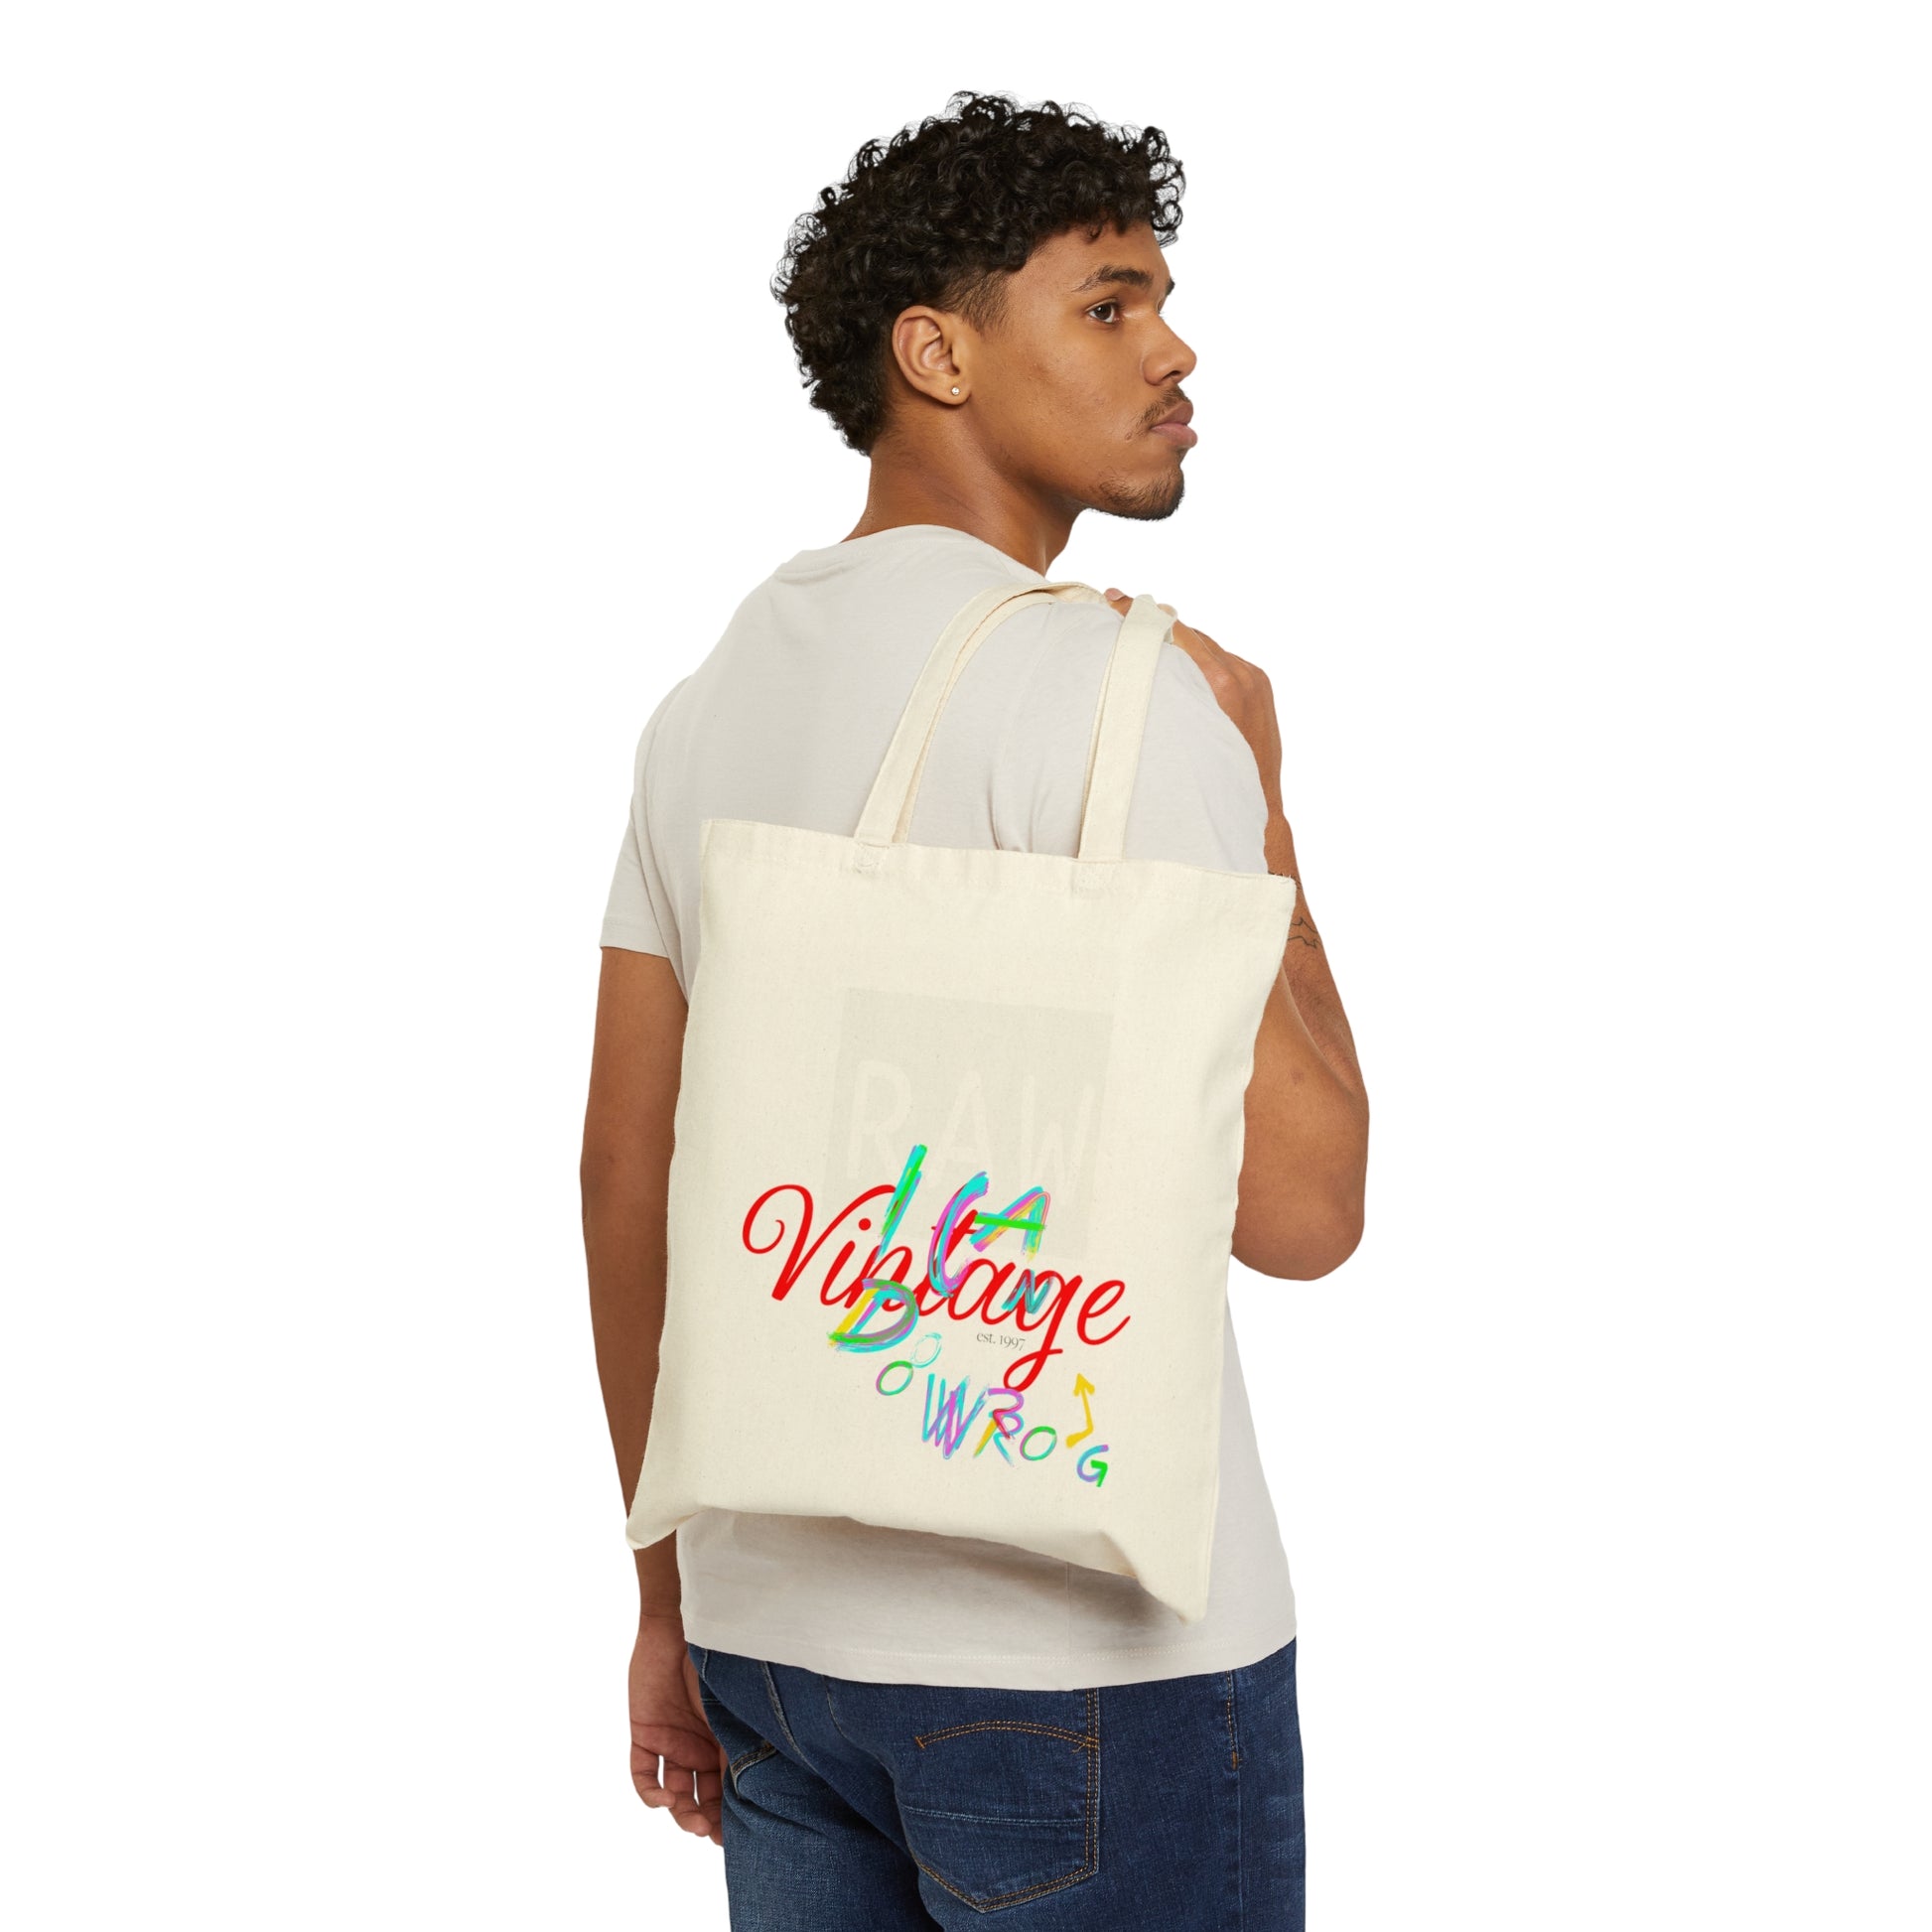 Shorty From Yonkers - 100% Cotton Canvas Tote Bag - 15" x 16" - Been Dope Supply